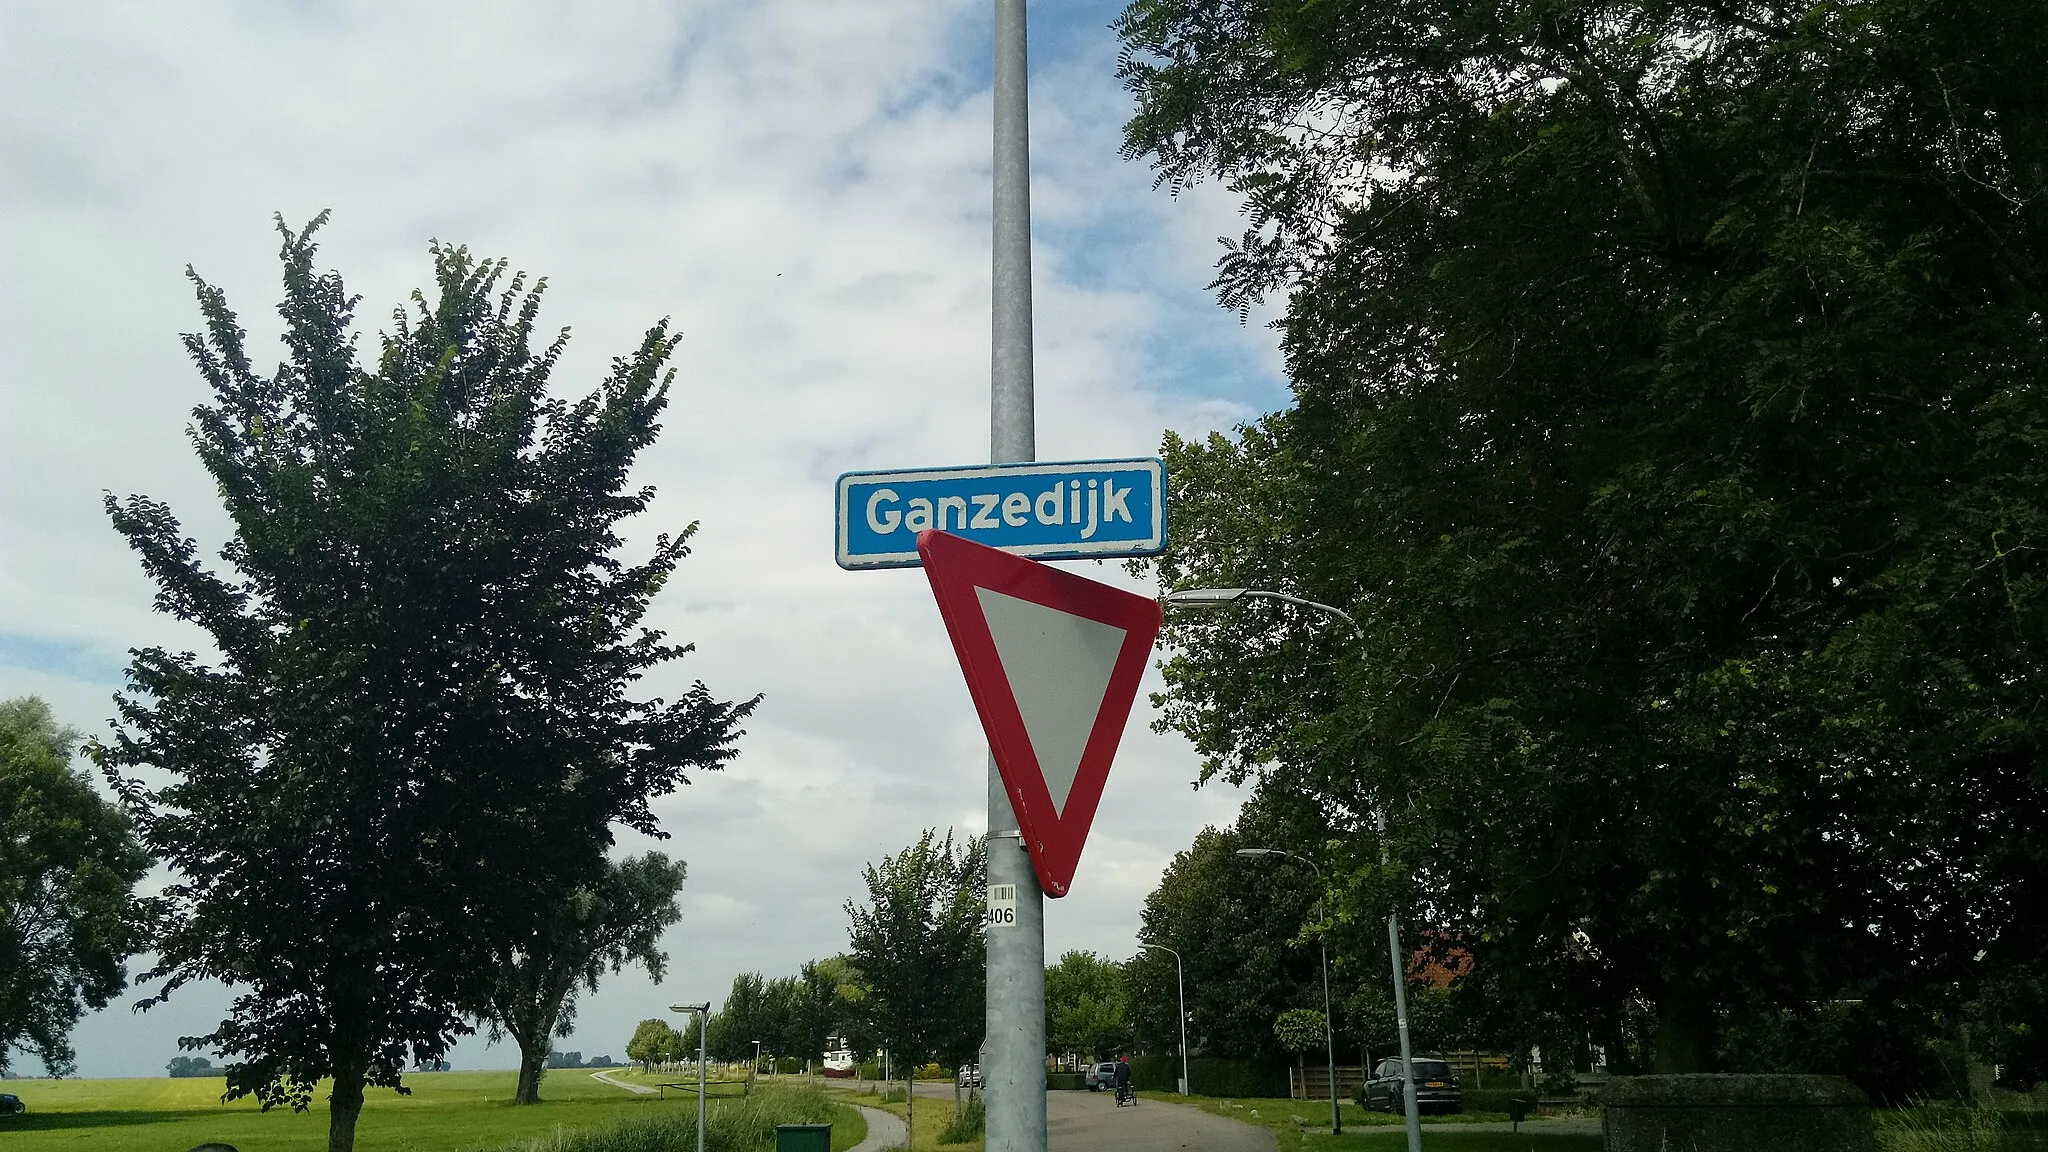 Photo showing: A local street sign, that is located in the Groninger village of Ganzedijk, Oldambt.